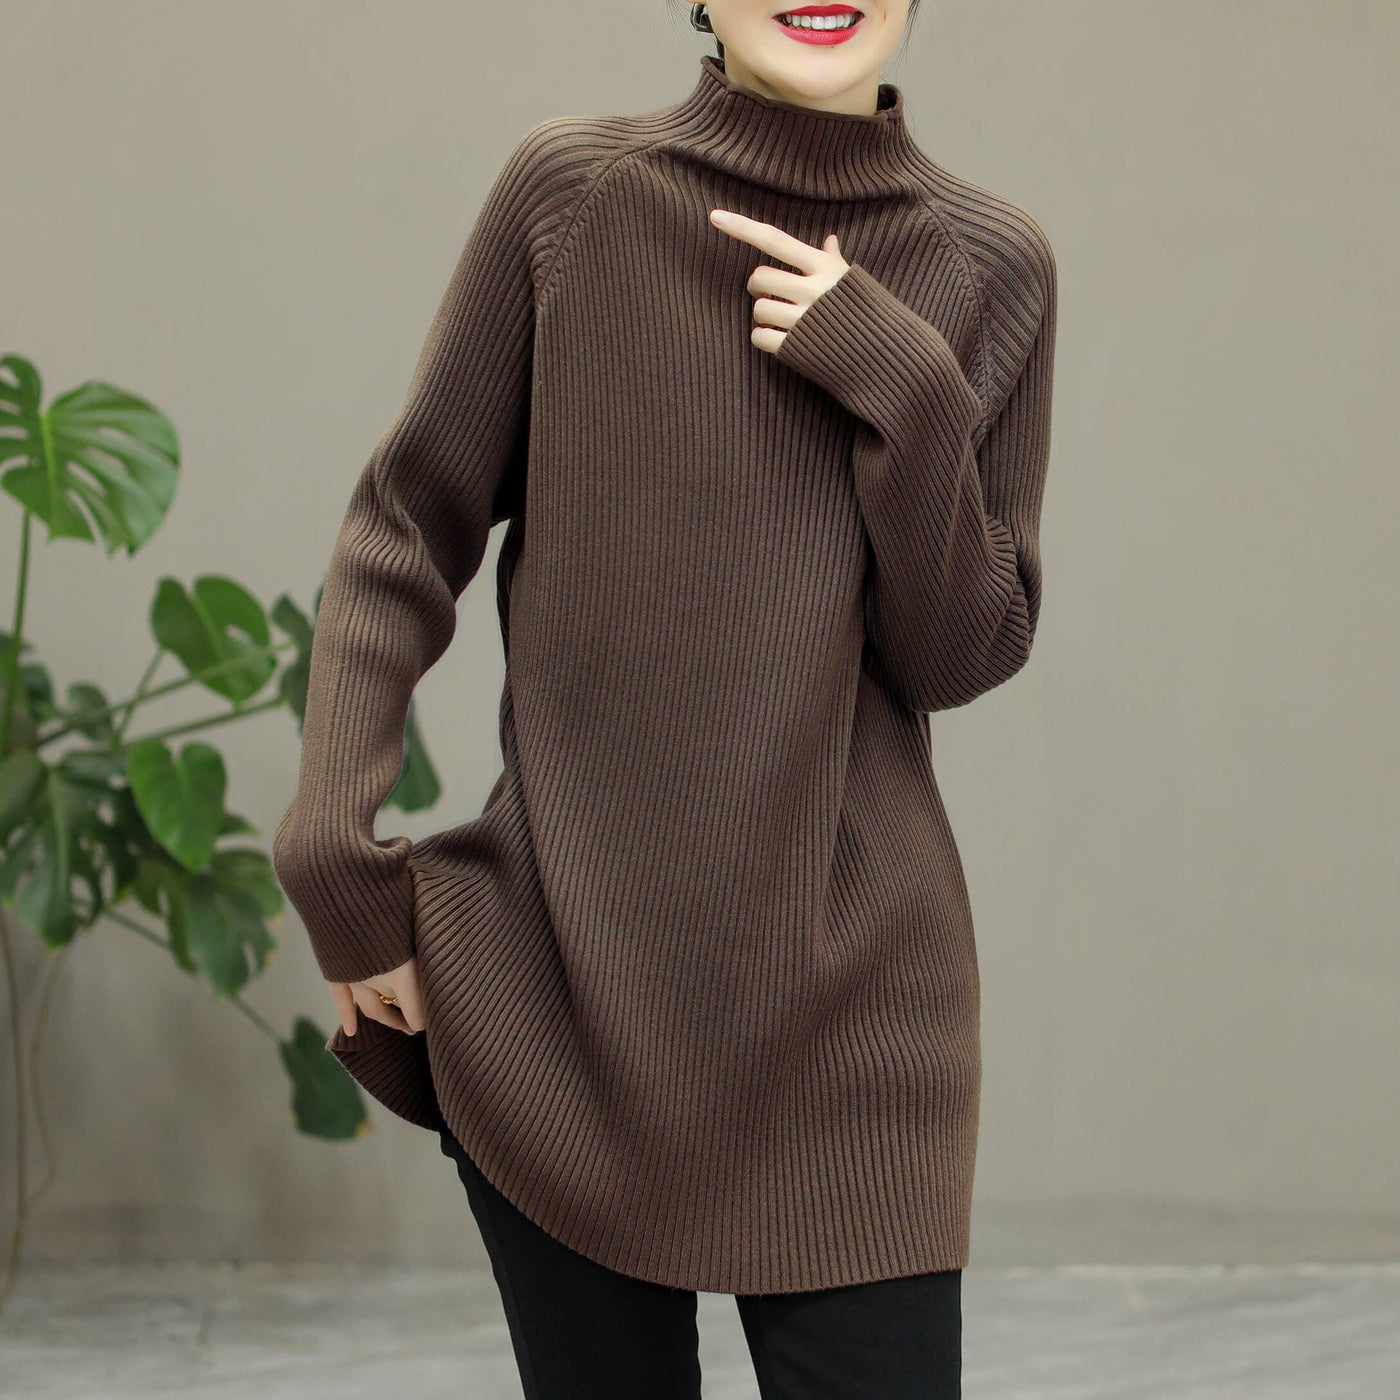 Winter Knitted Solid Stripe Turtleneck Elastic Long Sweater